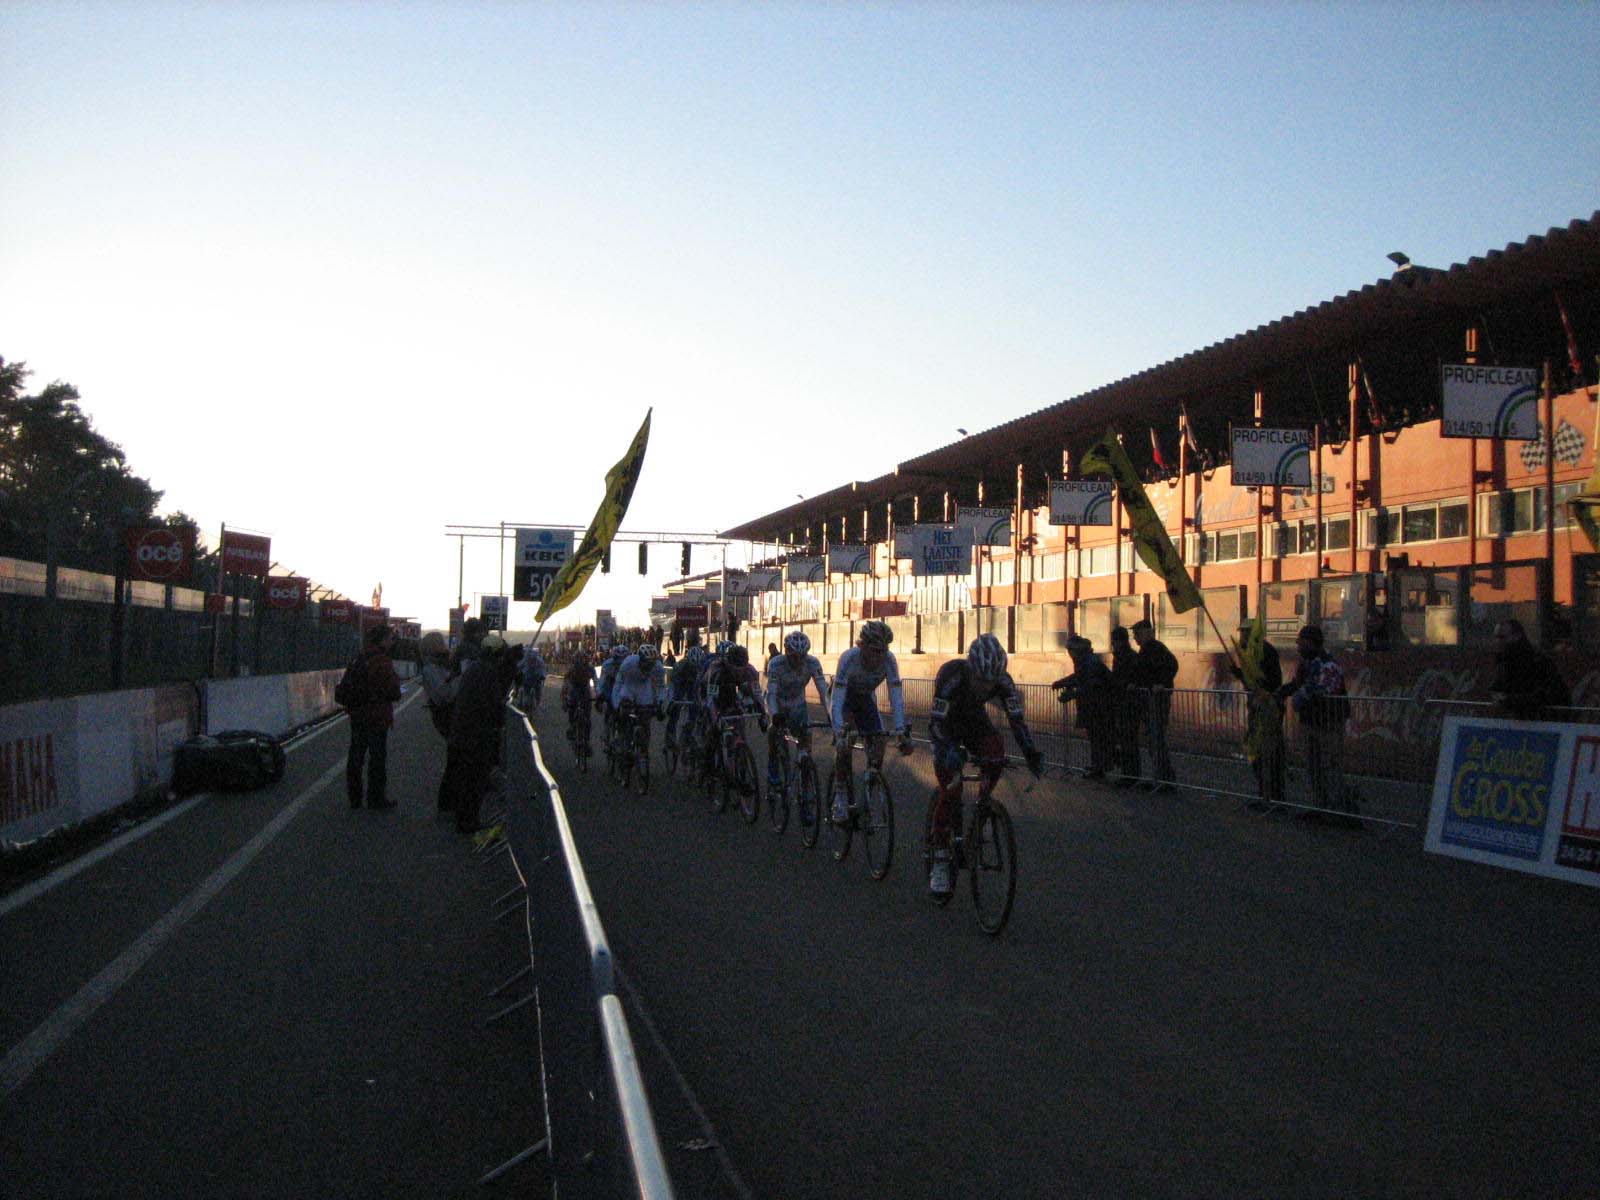 Chase group behind the leaders at sunset.